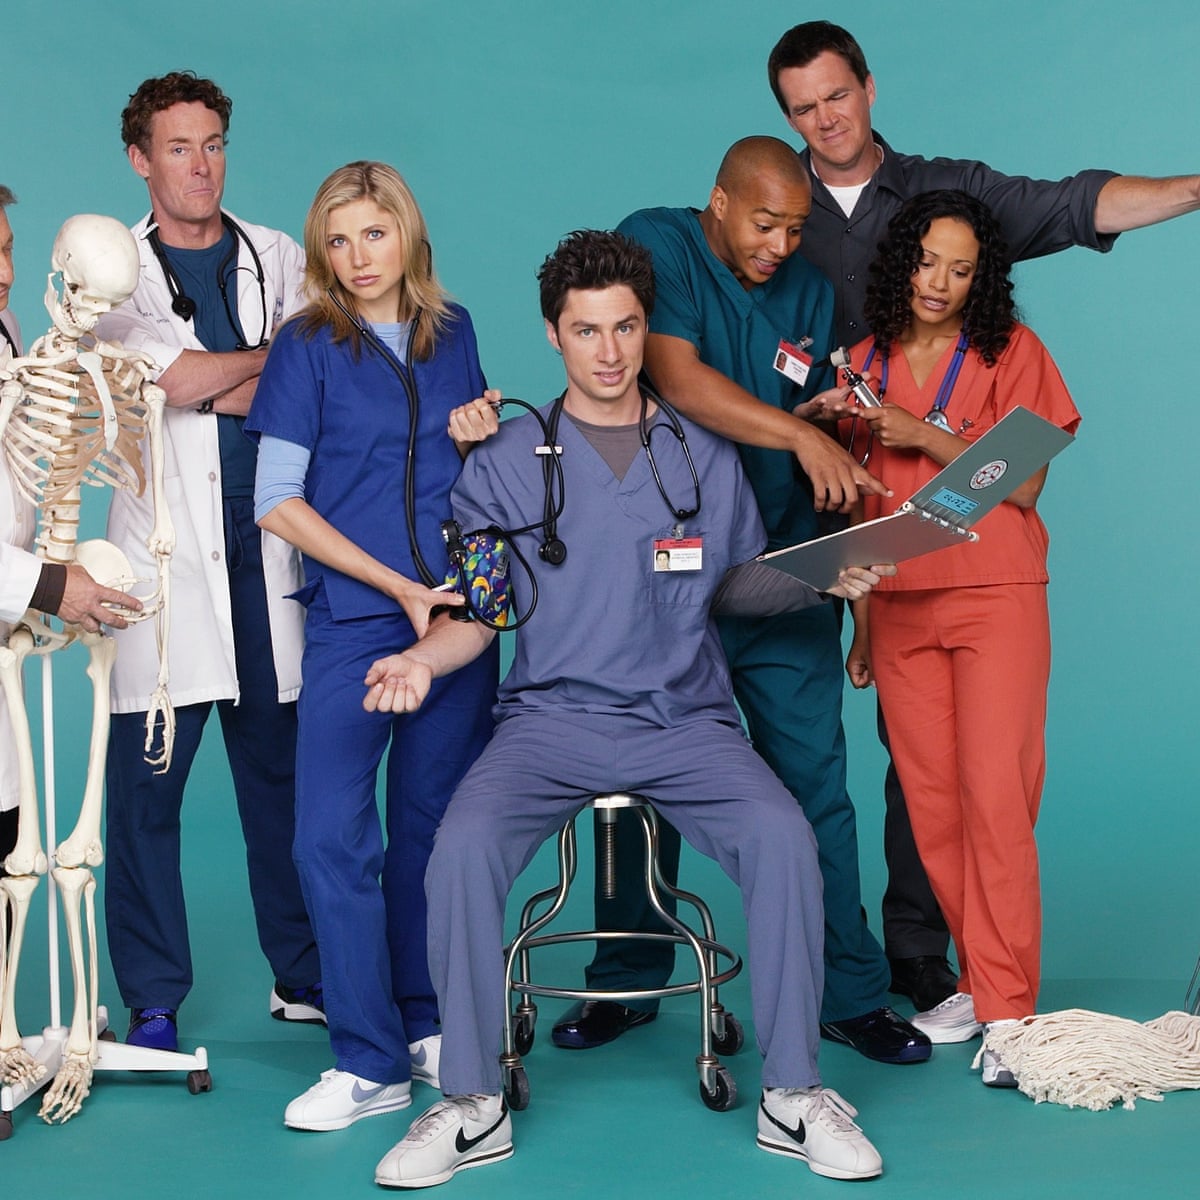 Scrubs" Is a tv series that endures and I’ve evolved from one characte...